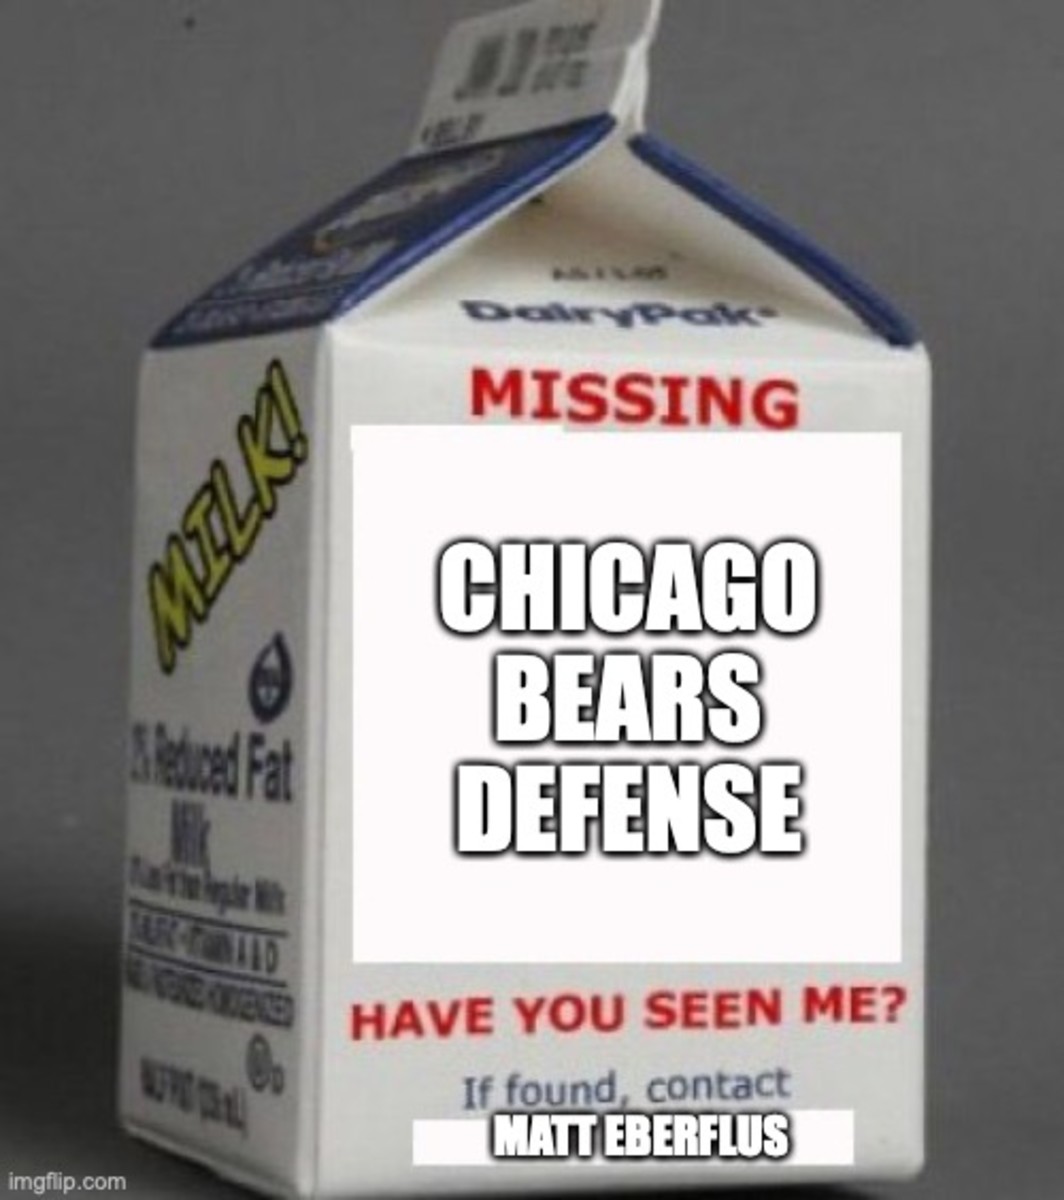 The Chicago Bears defense has gone missing the last few weeks.